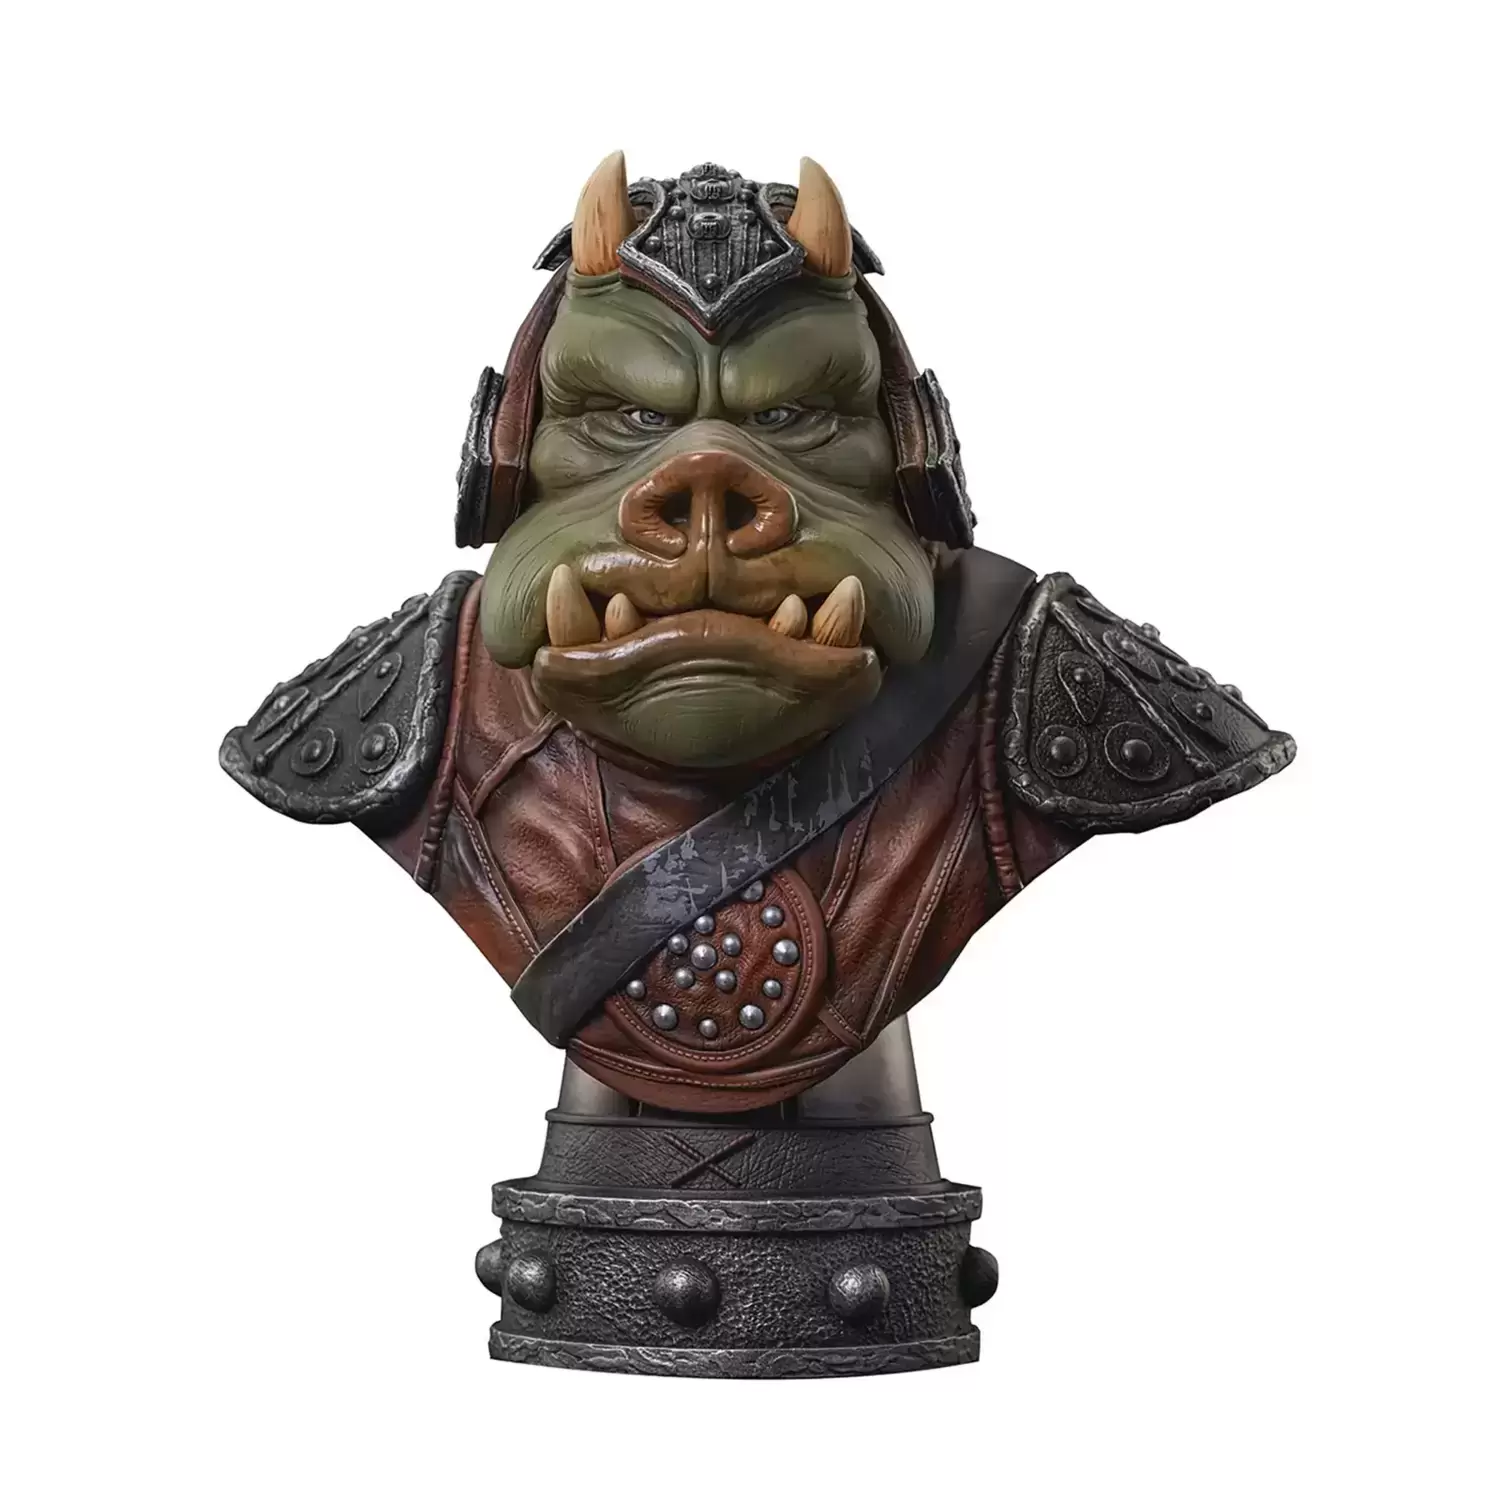 Gentle Giant Busts - Gammorean Guard